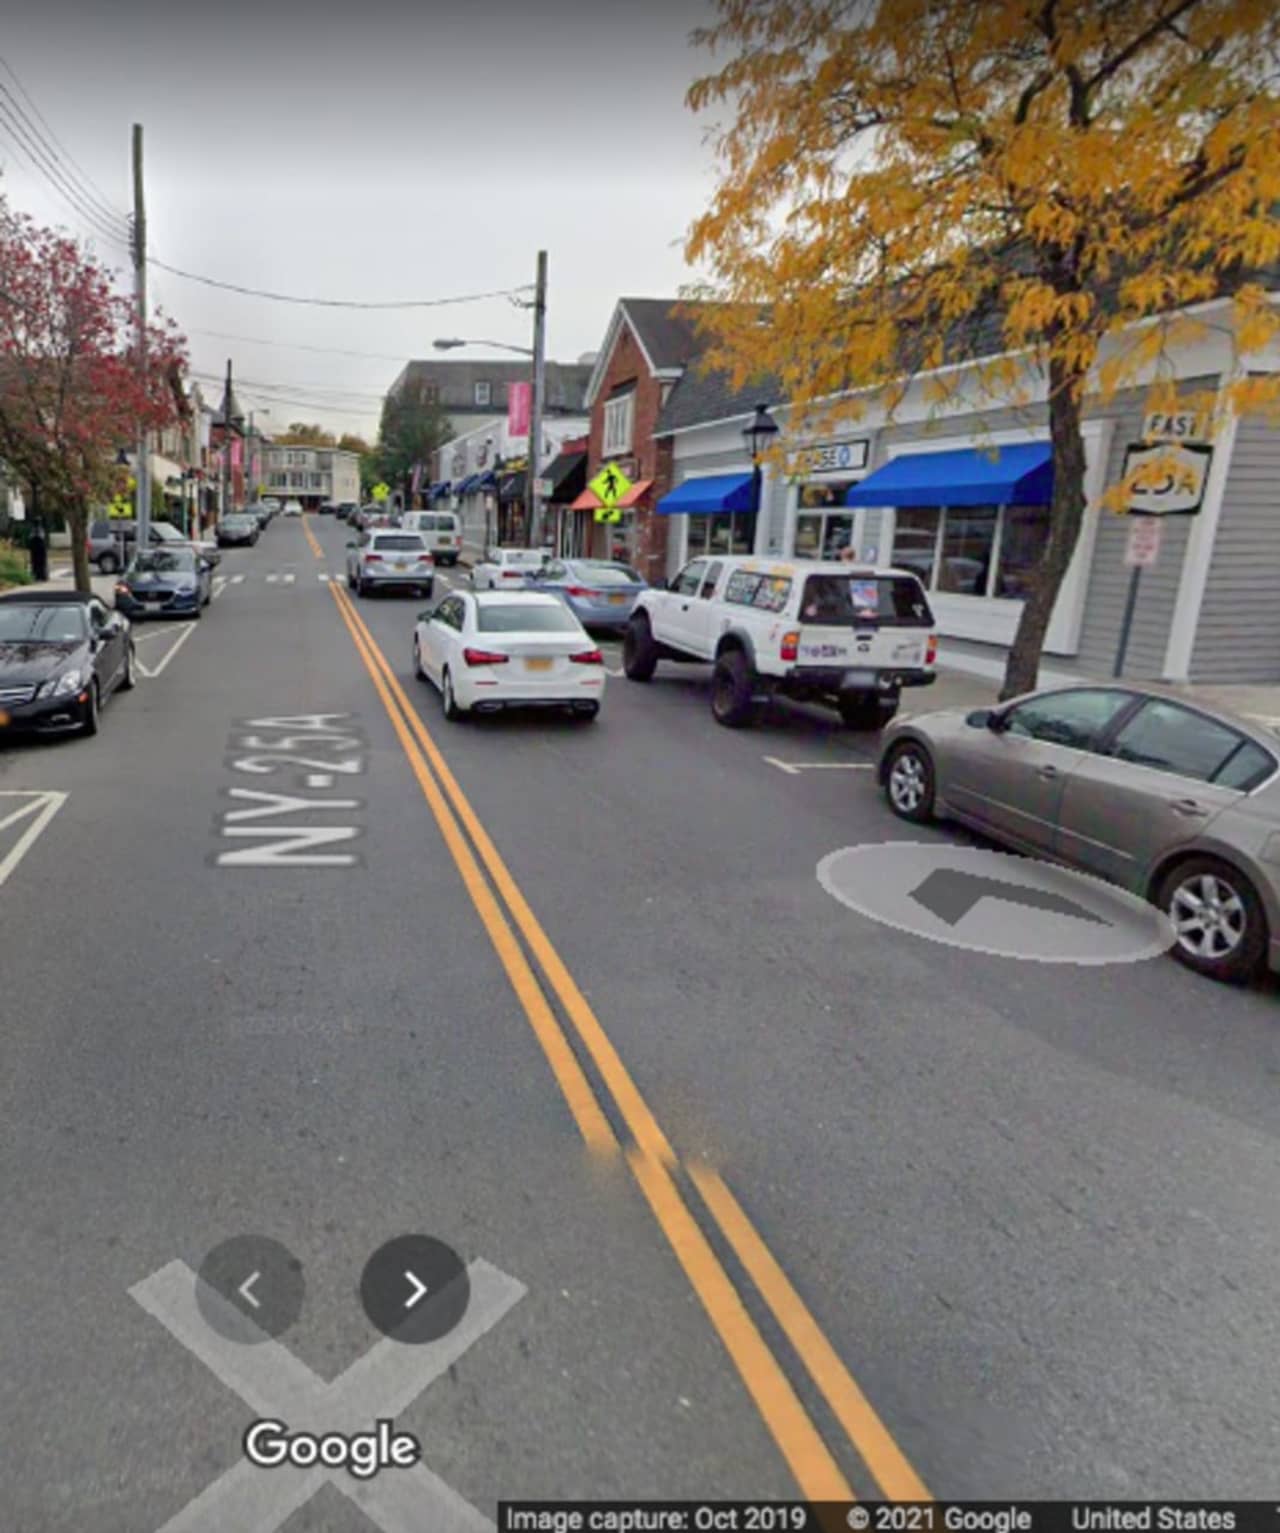 The area of Main Street in Port Jefferson where the shooting happened.